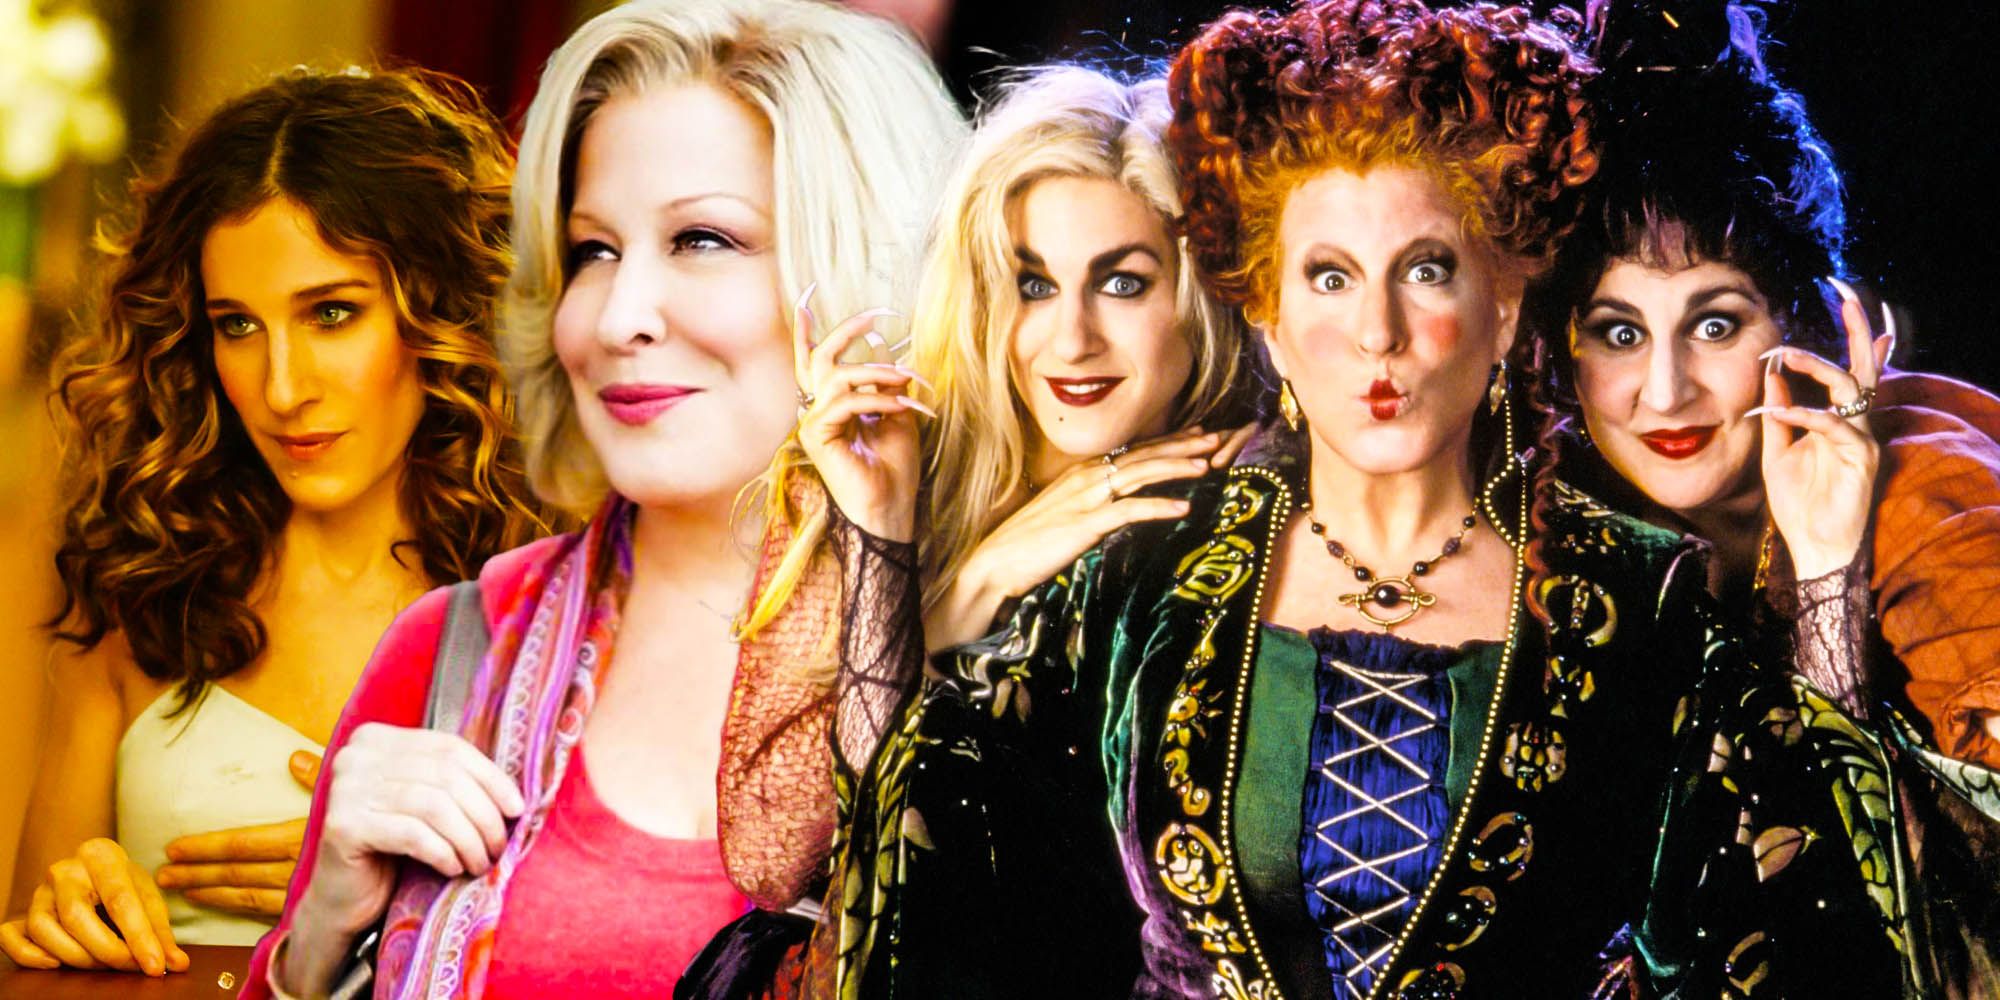 What the Hocus Pocus Cast Have Done Since The Movie sex and the city parental guidance bette midler sarah jessica parker